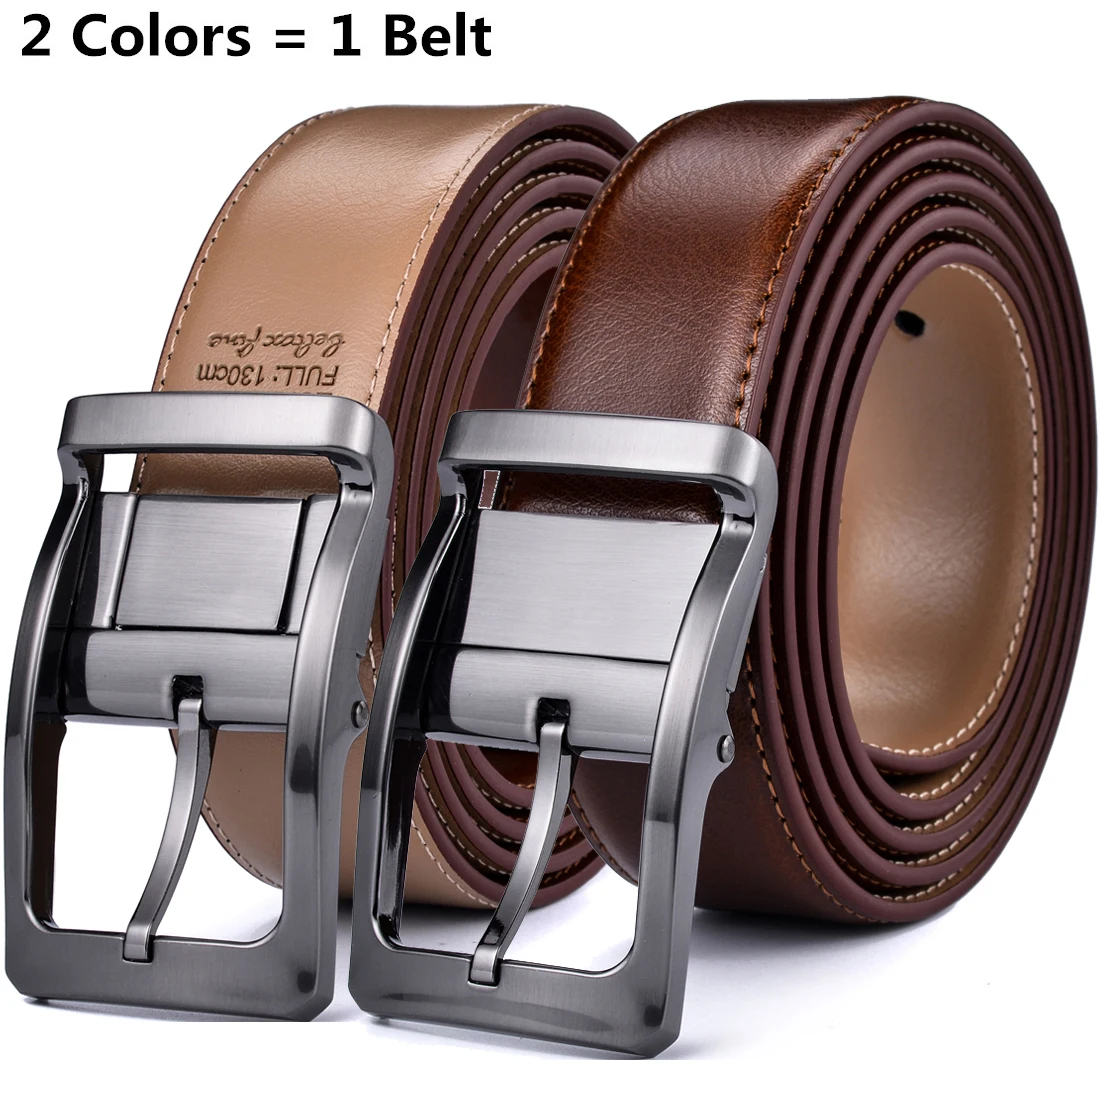 Men's Reversible Classic Dress Belt Leather Rotating Buckle Two In One By Beltox Fine